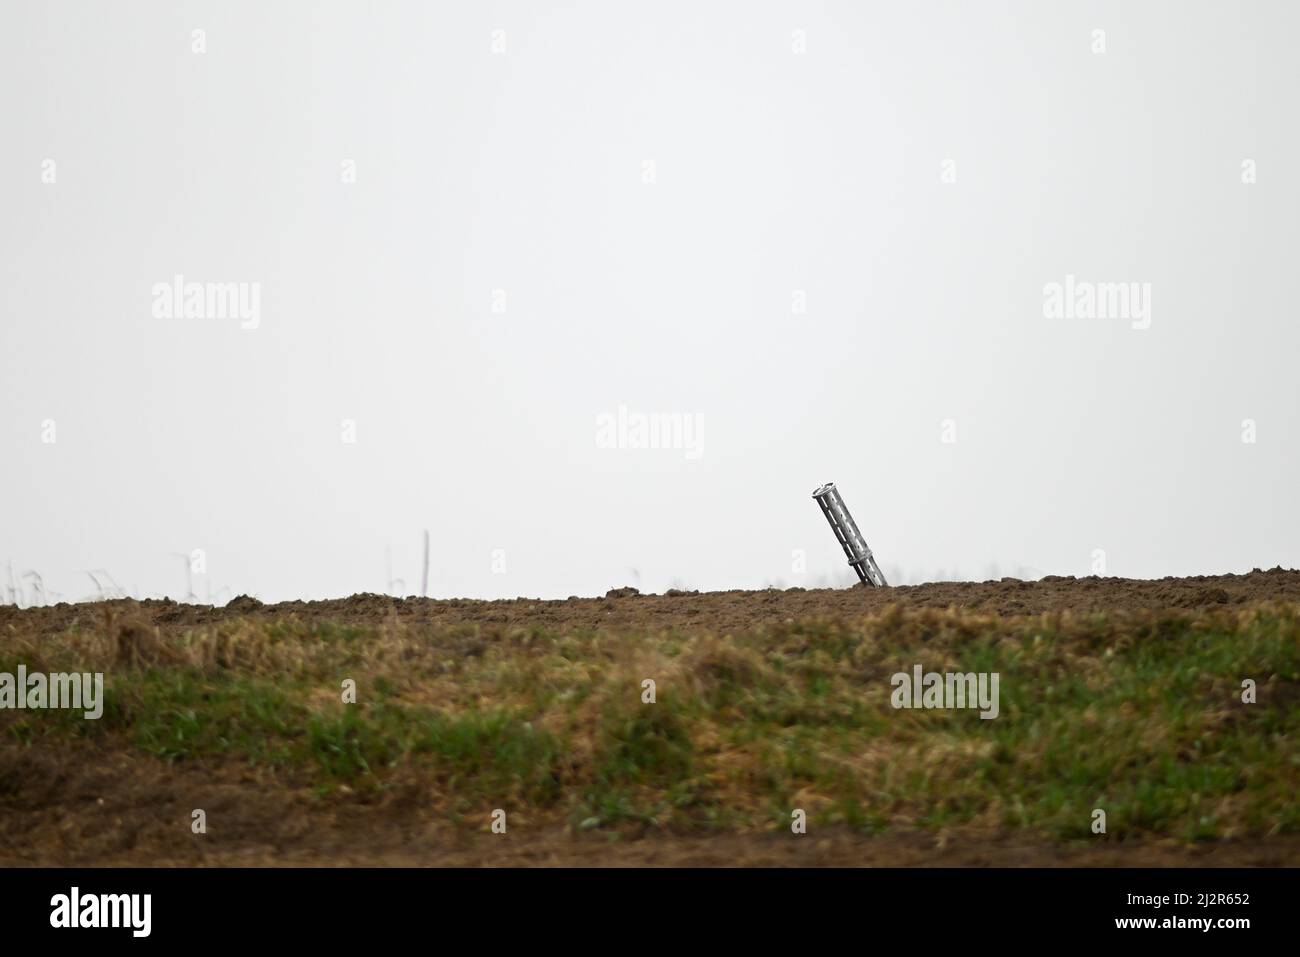 Ukraine. 03rd Apr, 2022. The husk of Russian cluster munition rockets lay buried in the fields near the villages of Smolyanka and Olyshivka after shelling in the previous nights, in the Chernihiv Oblast on April 3rd, 2022. Olyshivka, Ukraine. Russian military forces entered Ukraine territory on Feb. 24, 2022. (Photo by Justin Yau/Sipa USA) Credit: Sipa USA/Alamy Live News Stock Photo